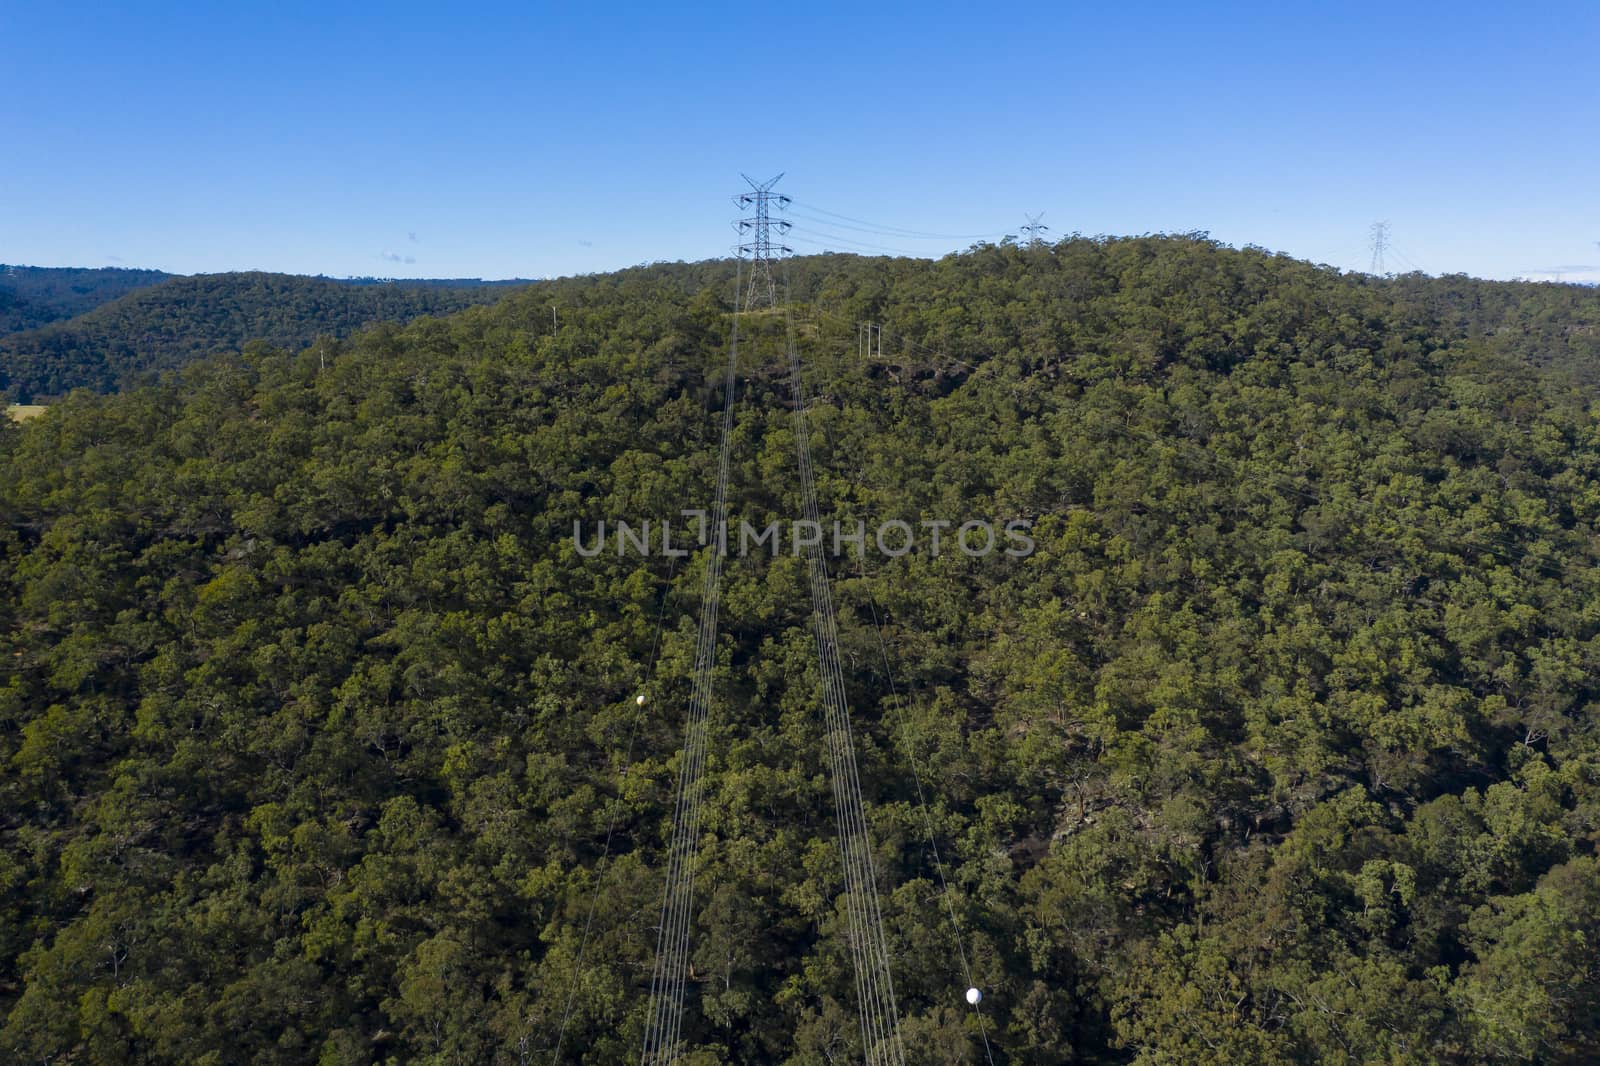 An electricity transmission tower and cables across a forest by WittkePhotos